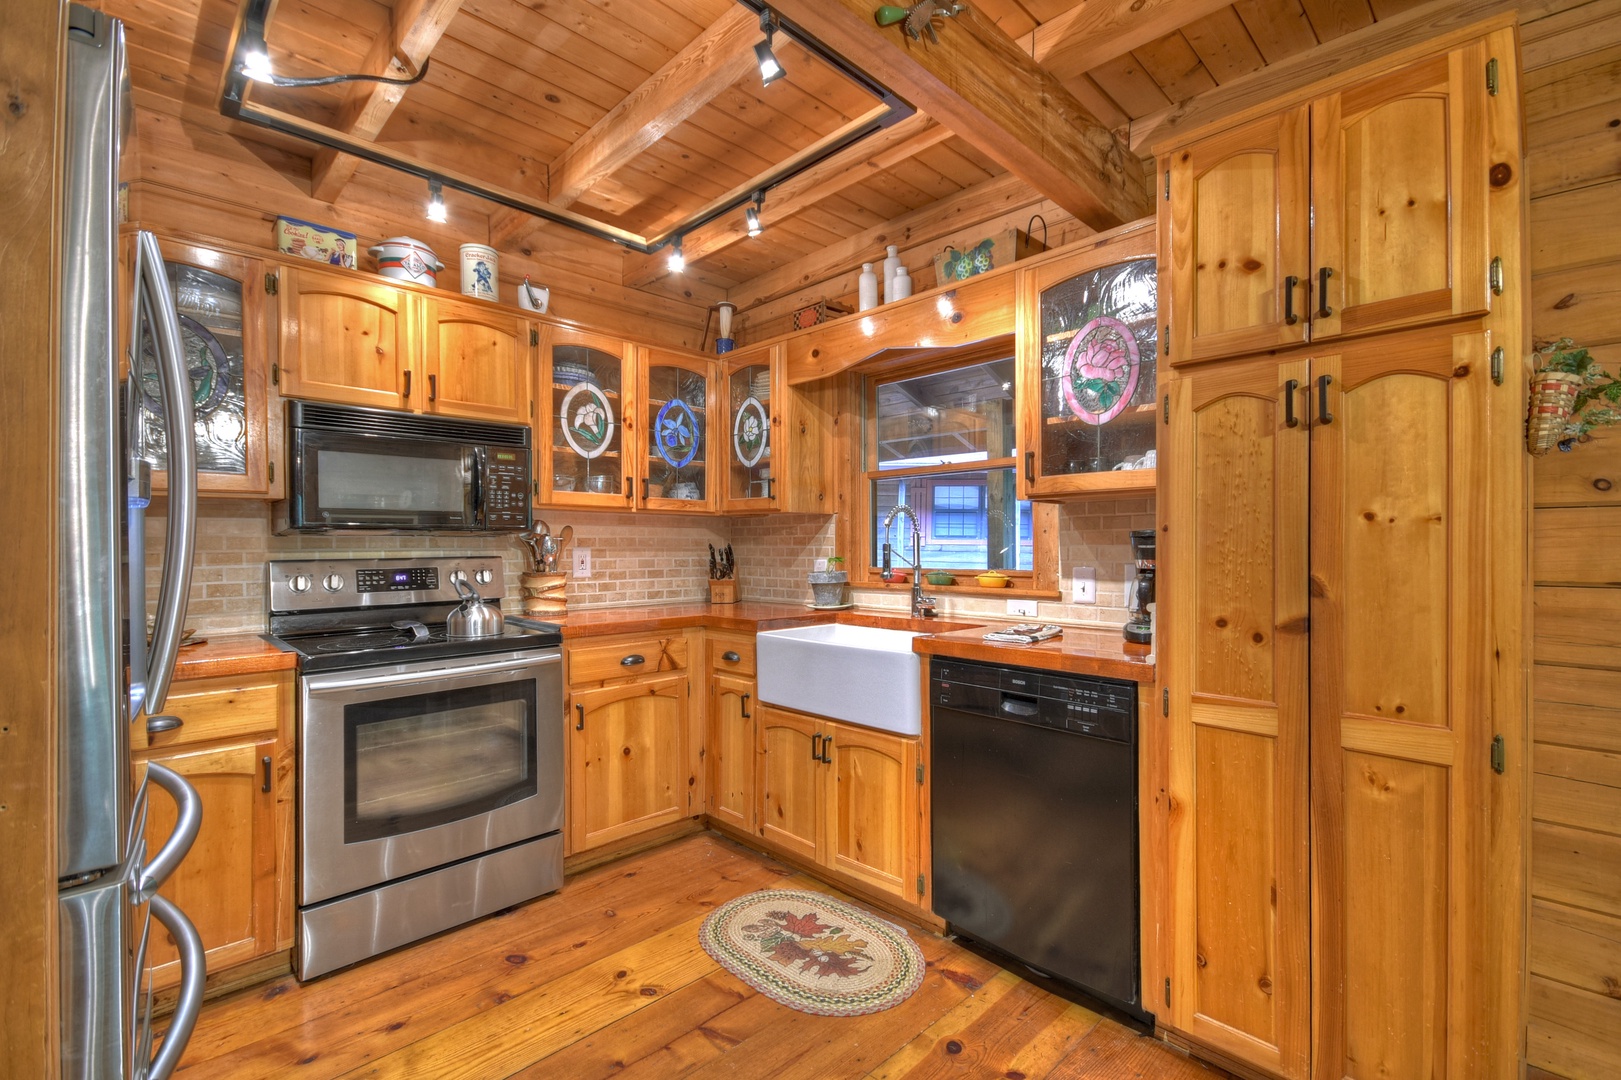 Falling Leaf- Kitchen area with rustic cabinets and appliances